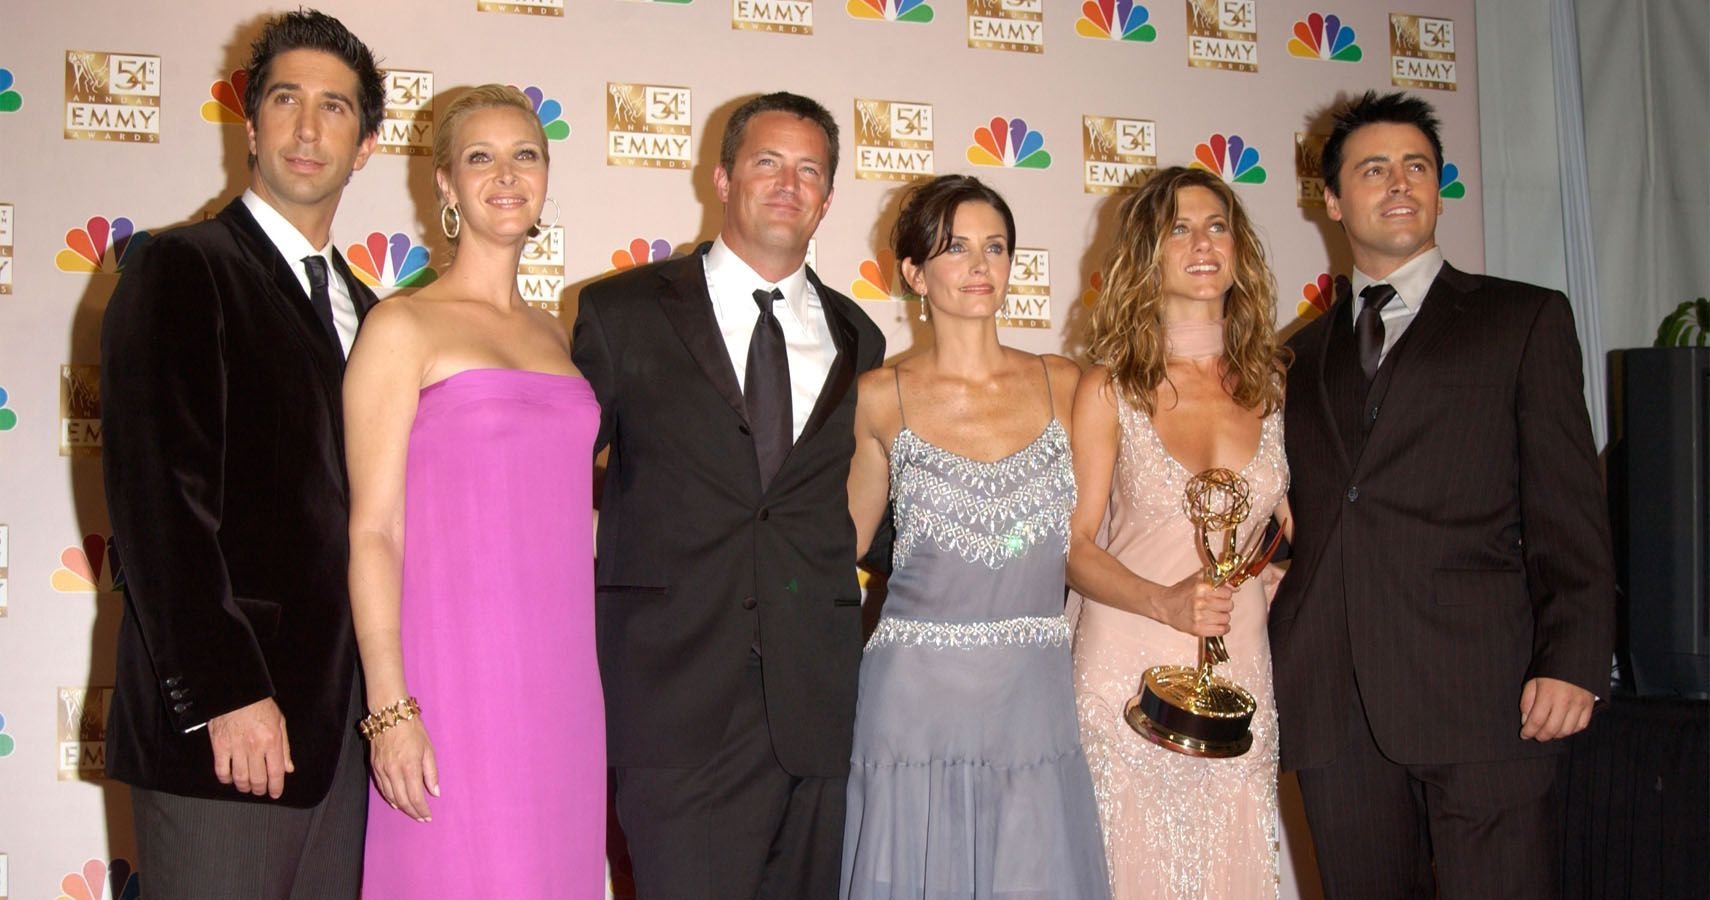 The Friends Reunion: How Much The Cast Will Be Paid